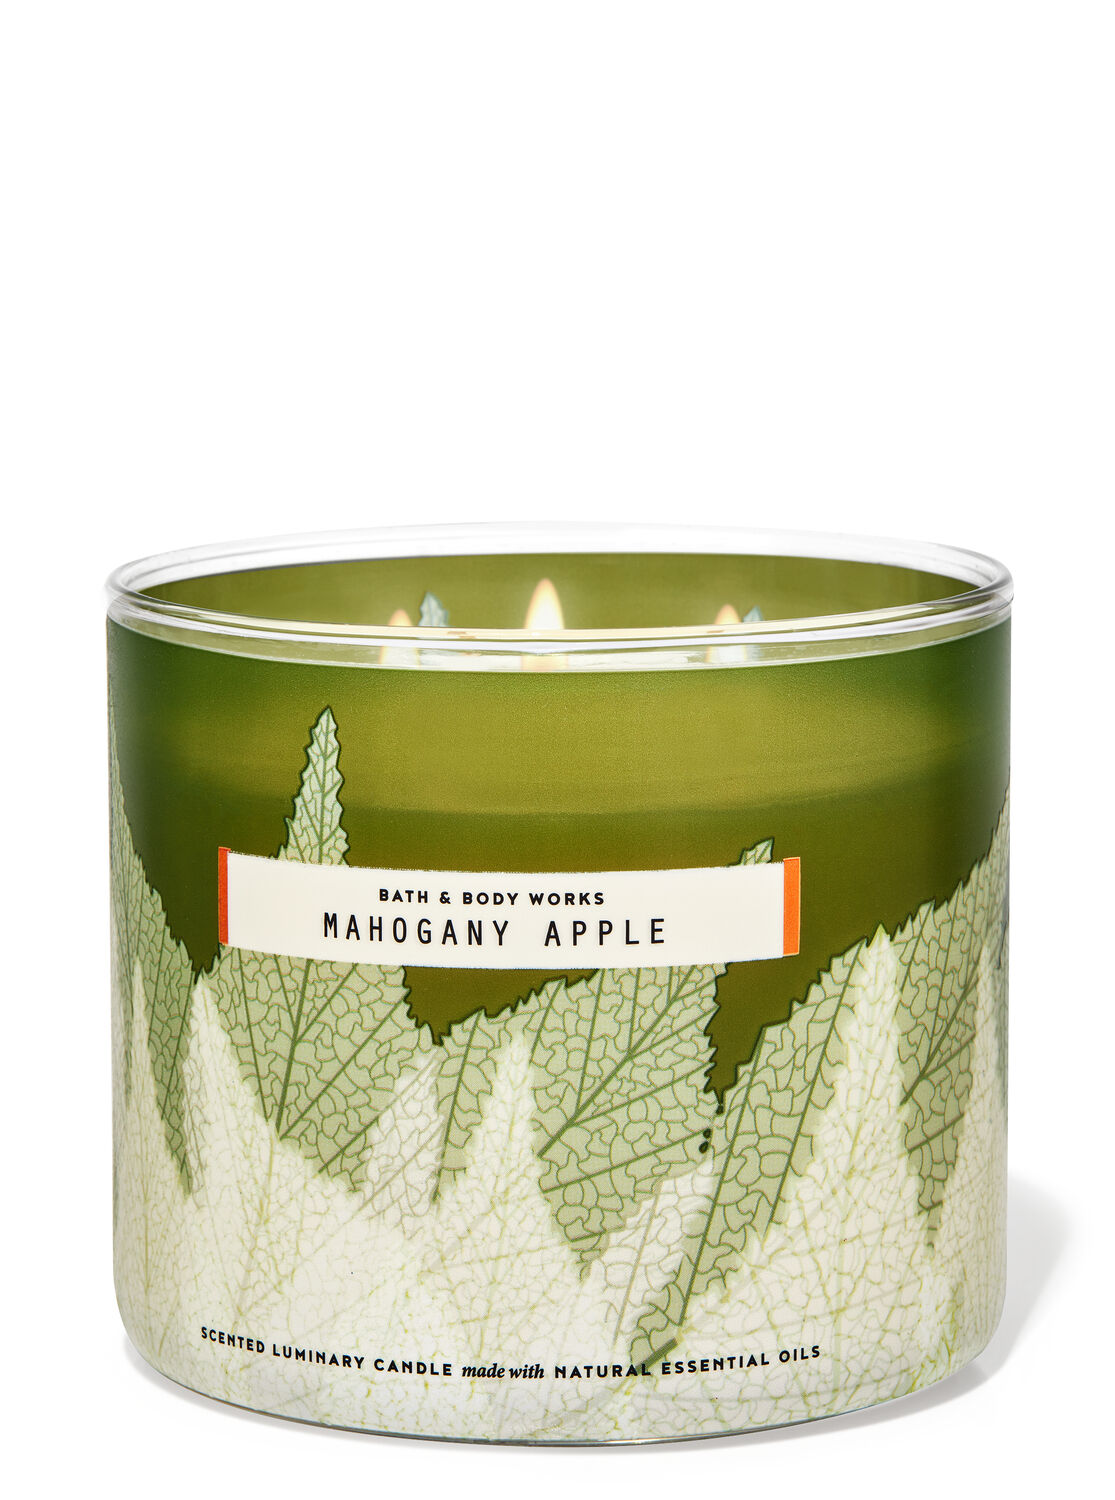 BATH & BODY WORKS SEA GRASS SCENTED 3 WICK CANDLE LARGE 14.5oz NEW 